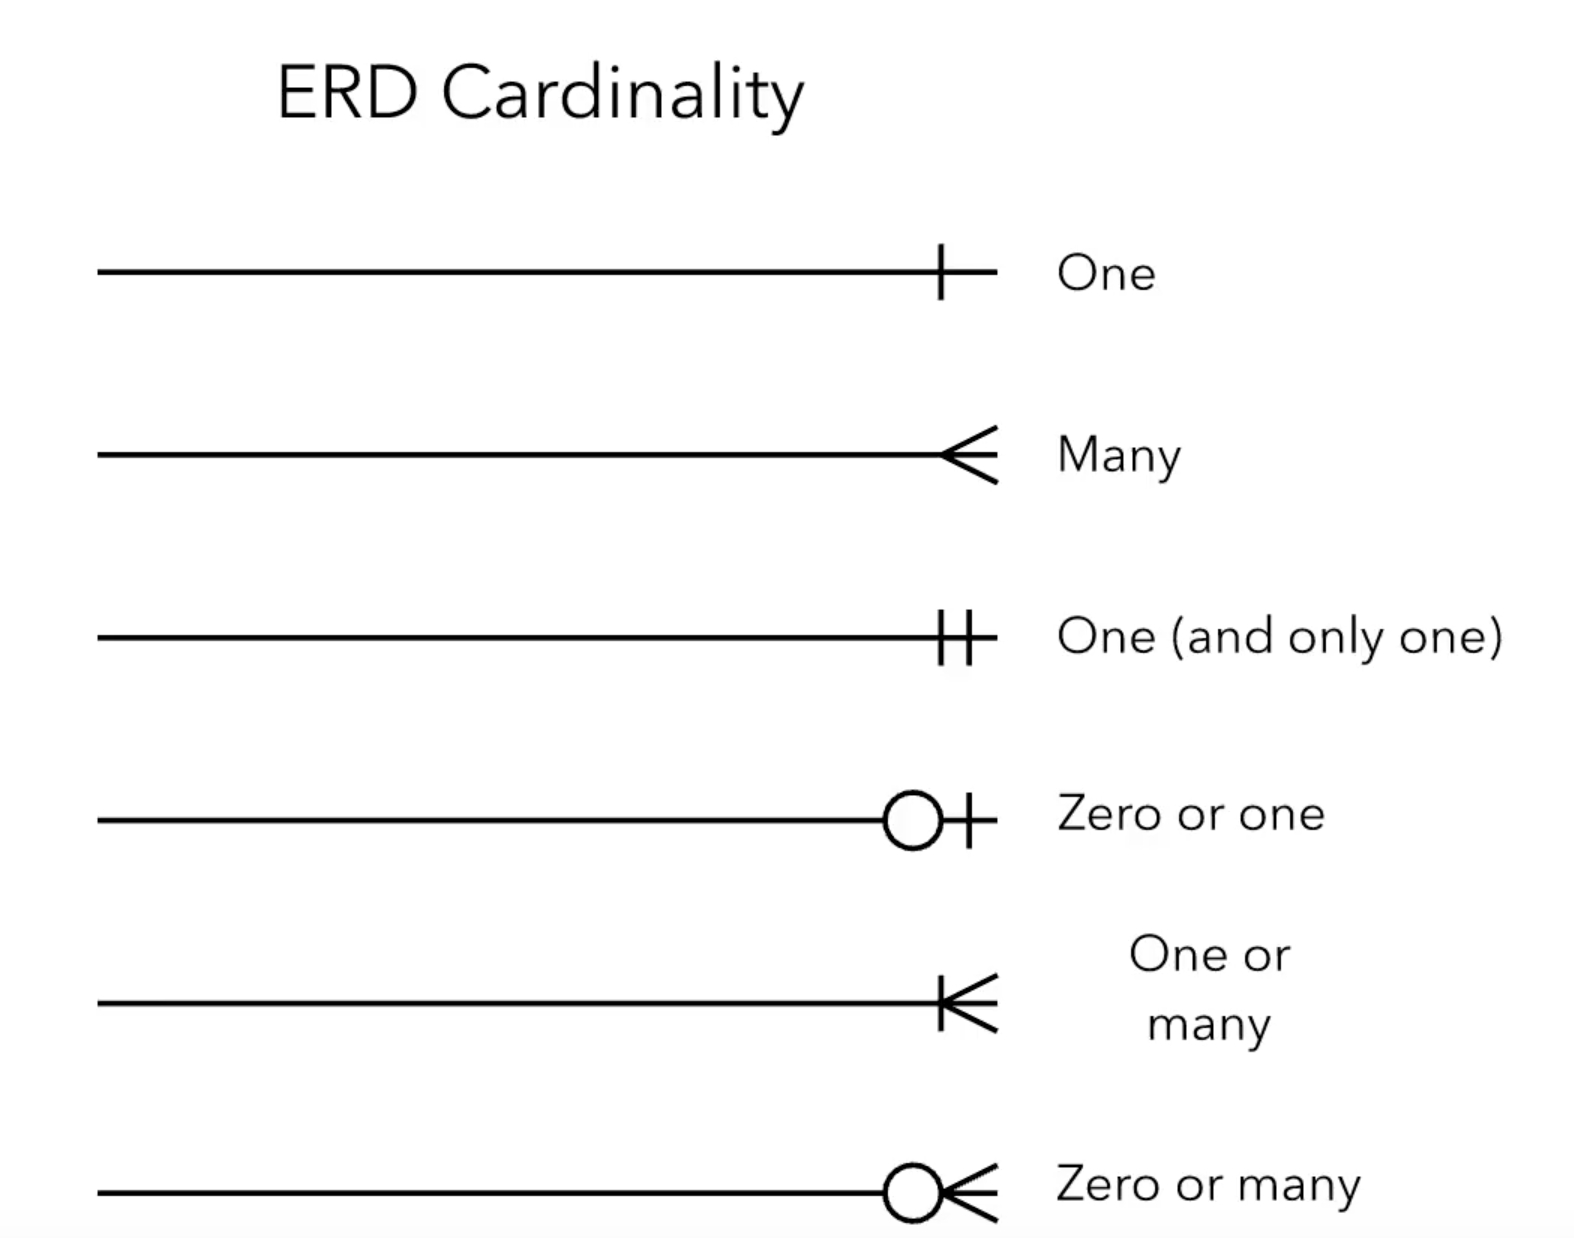 Er Diagram - Are The Relations And Cardinalities Correct for Entity Relationship Cardinality